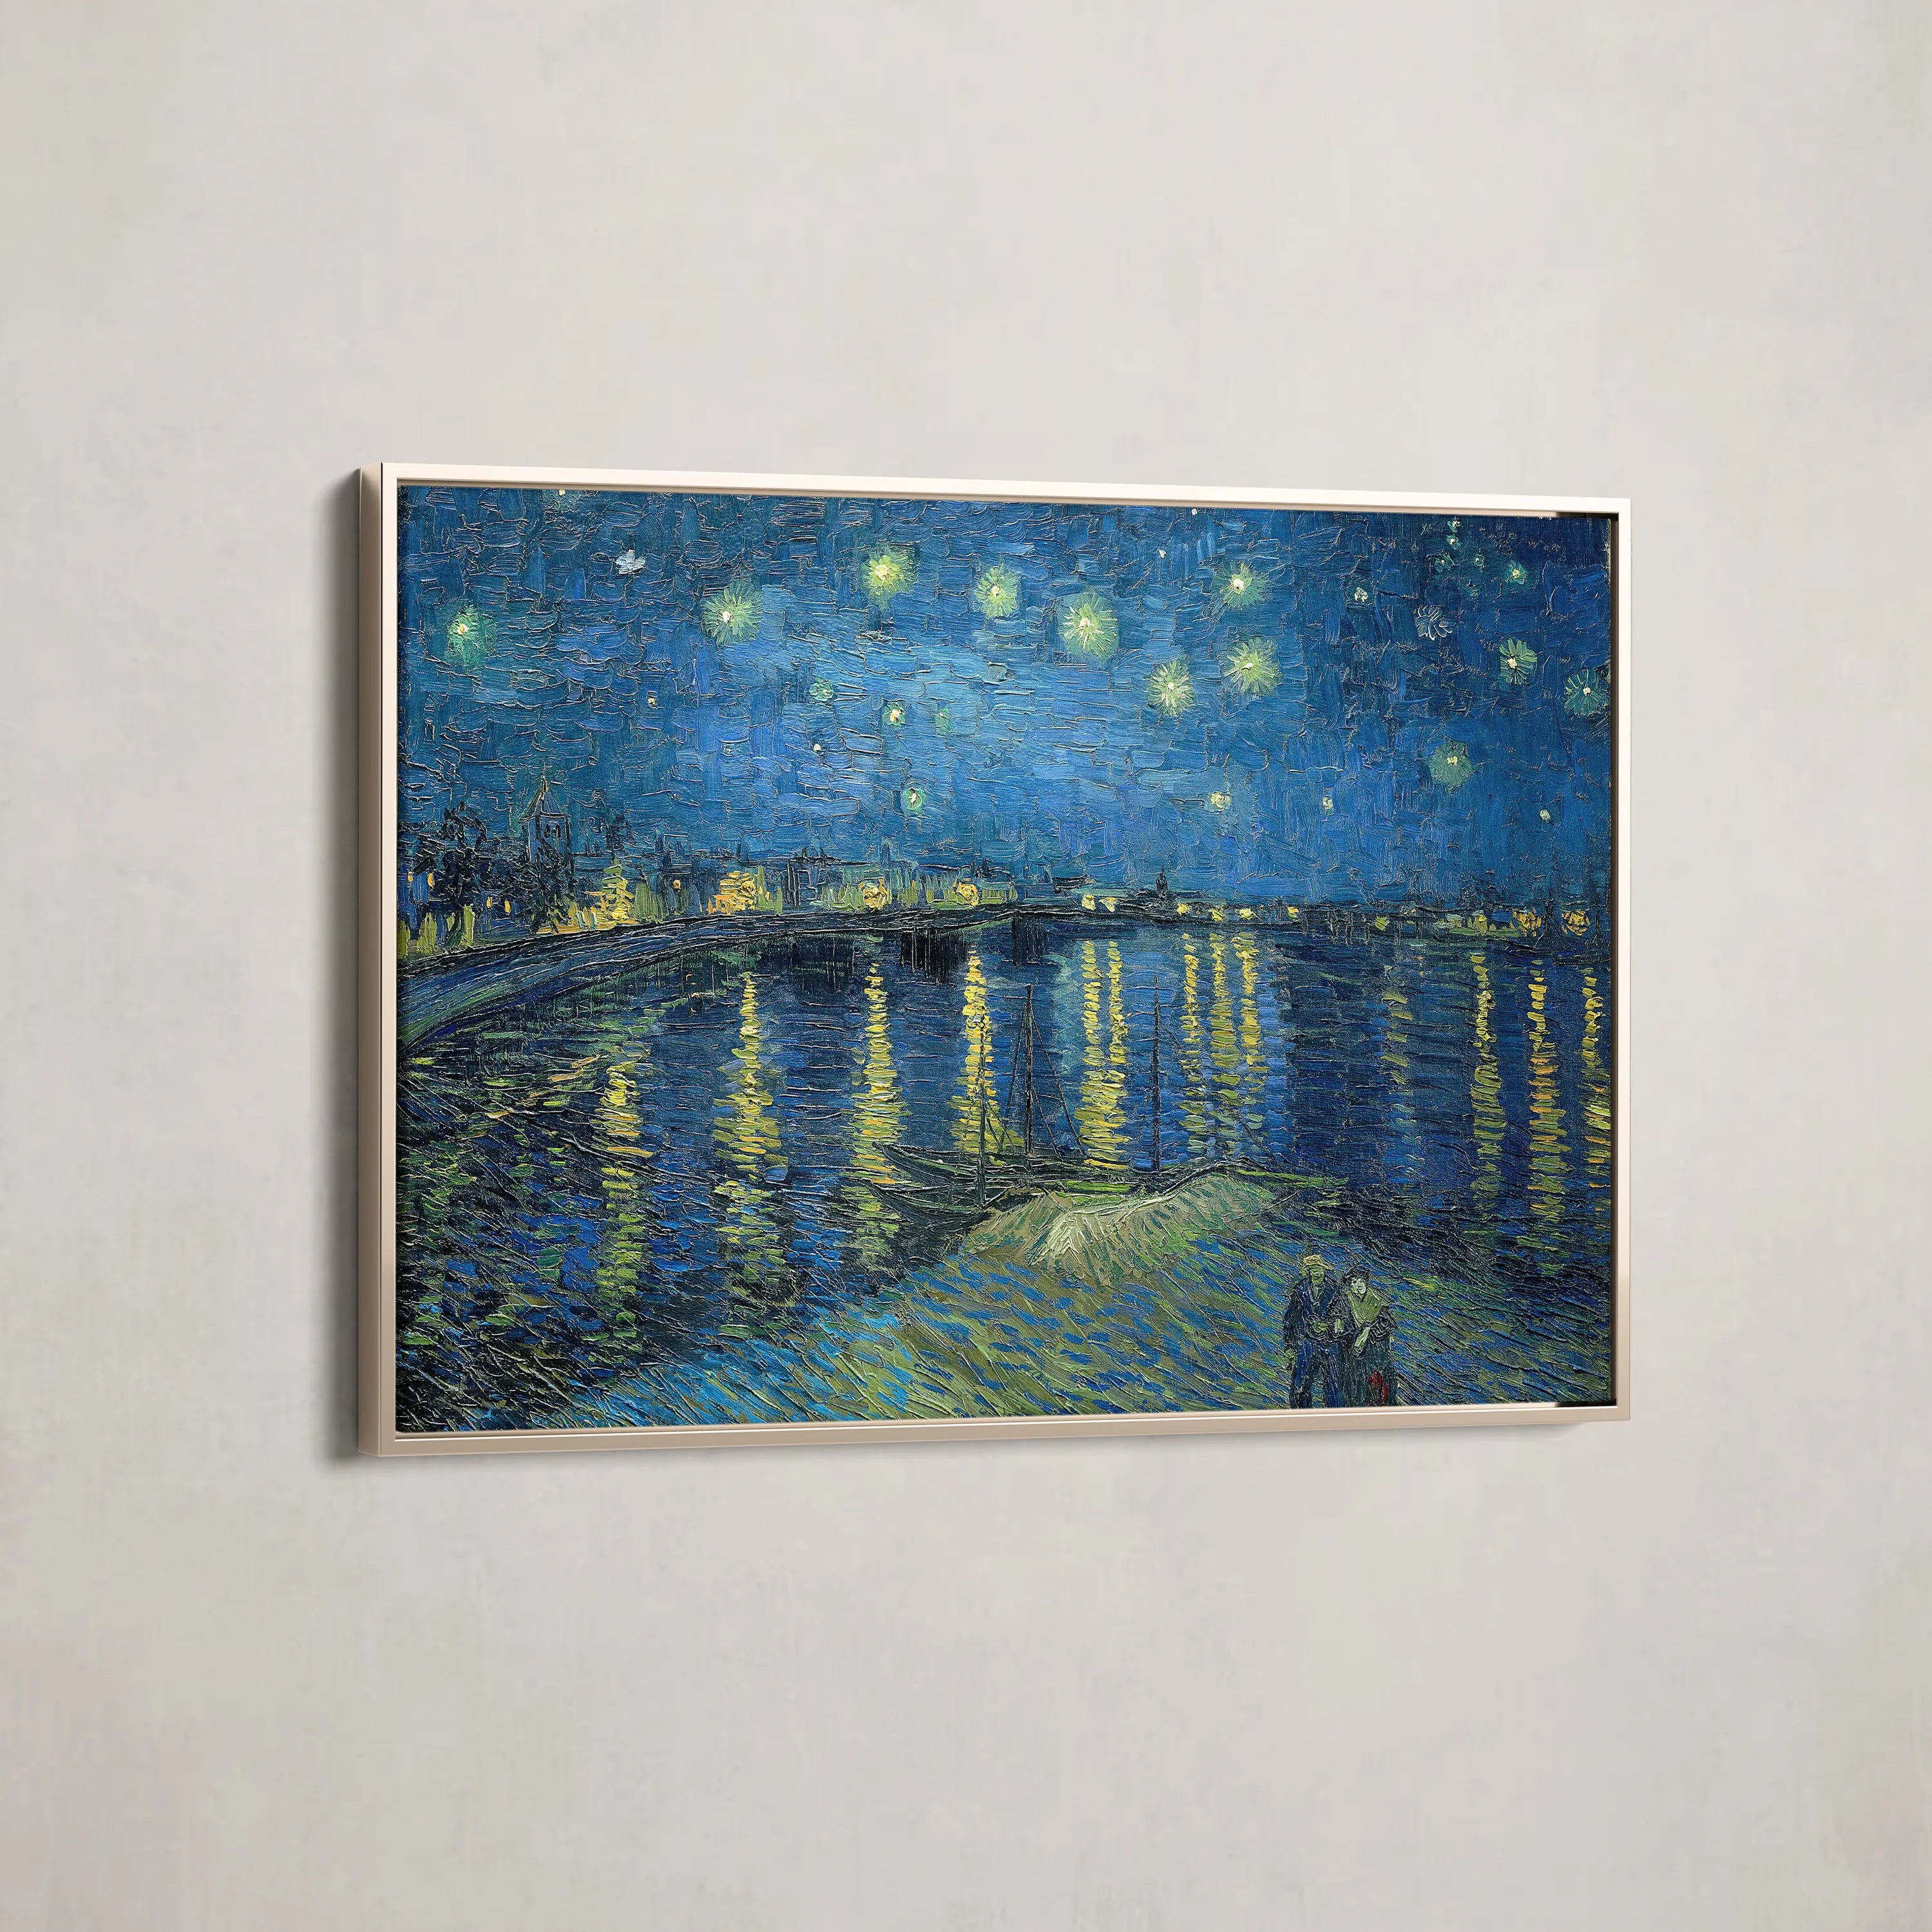 Starry Night Over the Rhone (1888) by Vincent van Gogh